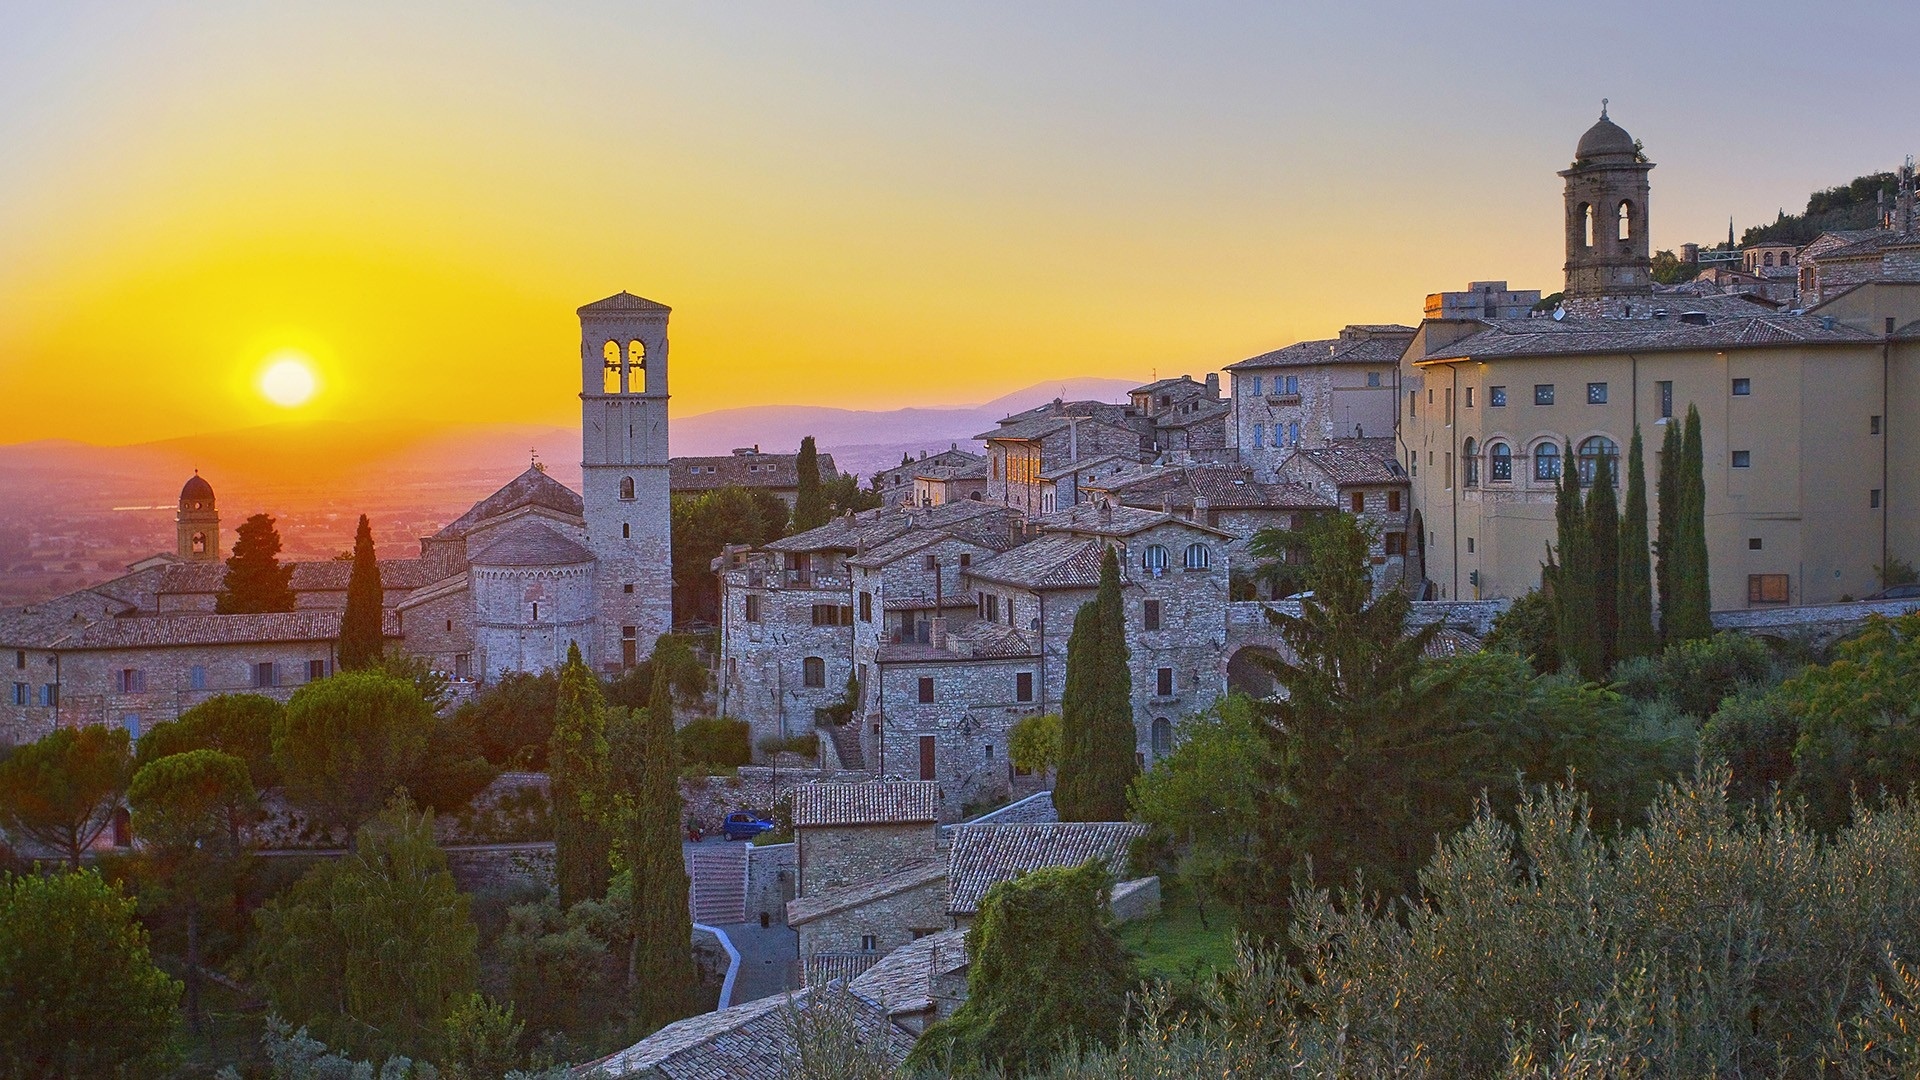 assisi, Italy, Architecture, Buildings, Church, Cathedral, Sunset, Sunrise, Sky Wallpaper